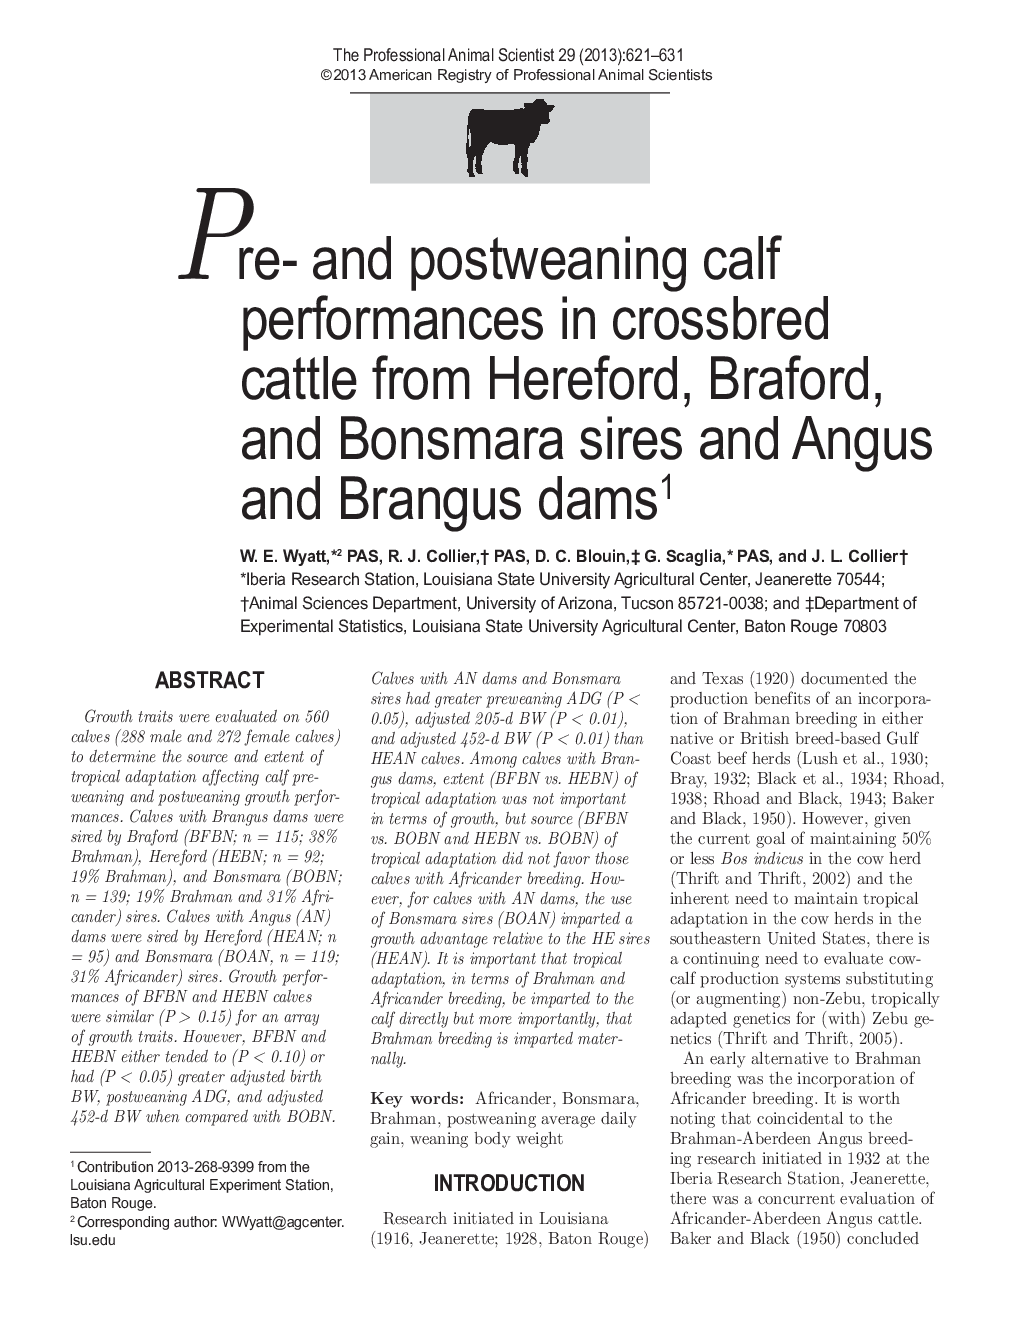 Pre- and postweaning calf performances in crossbred cattle from Hereford, Braford, and Bonsmara sires and Angus and Brangus dams1